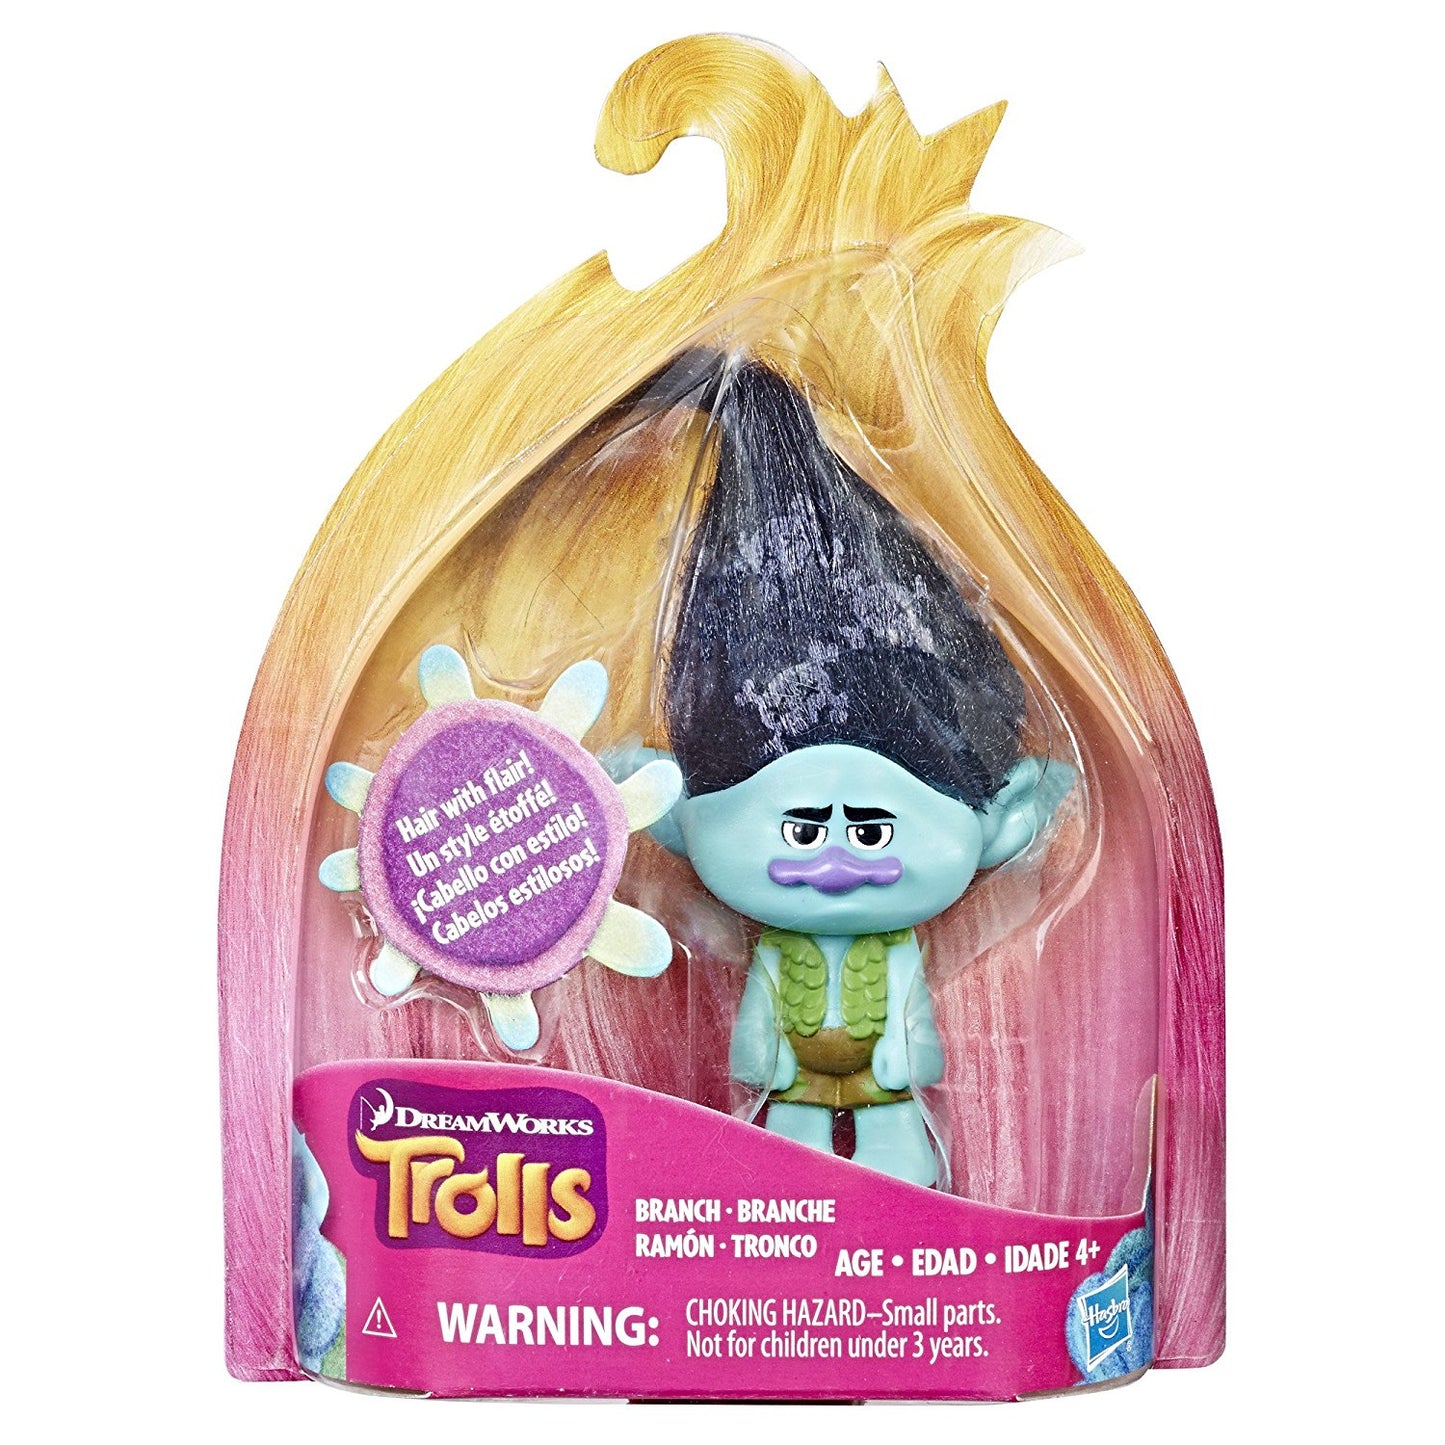 Trolls Branch Hair Collectible Figure with Printed Hair